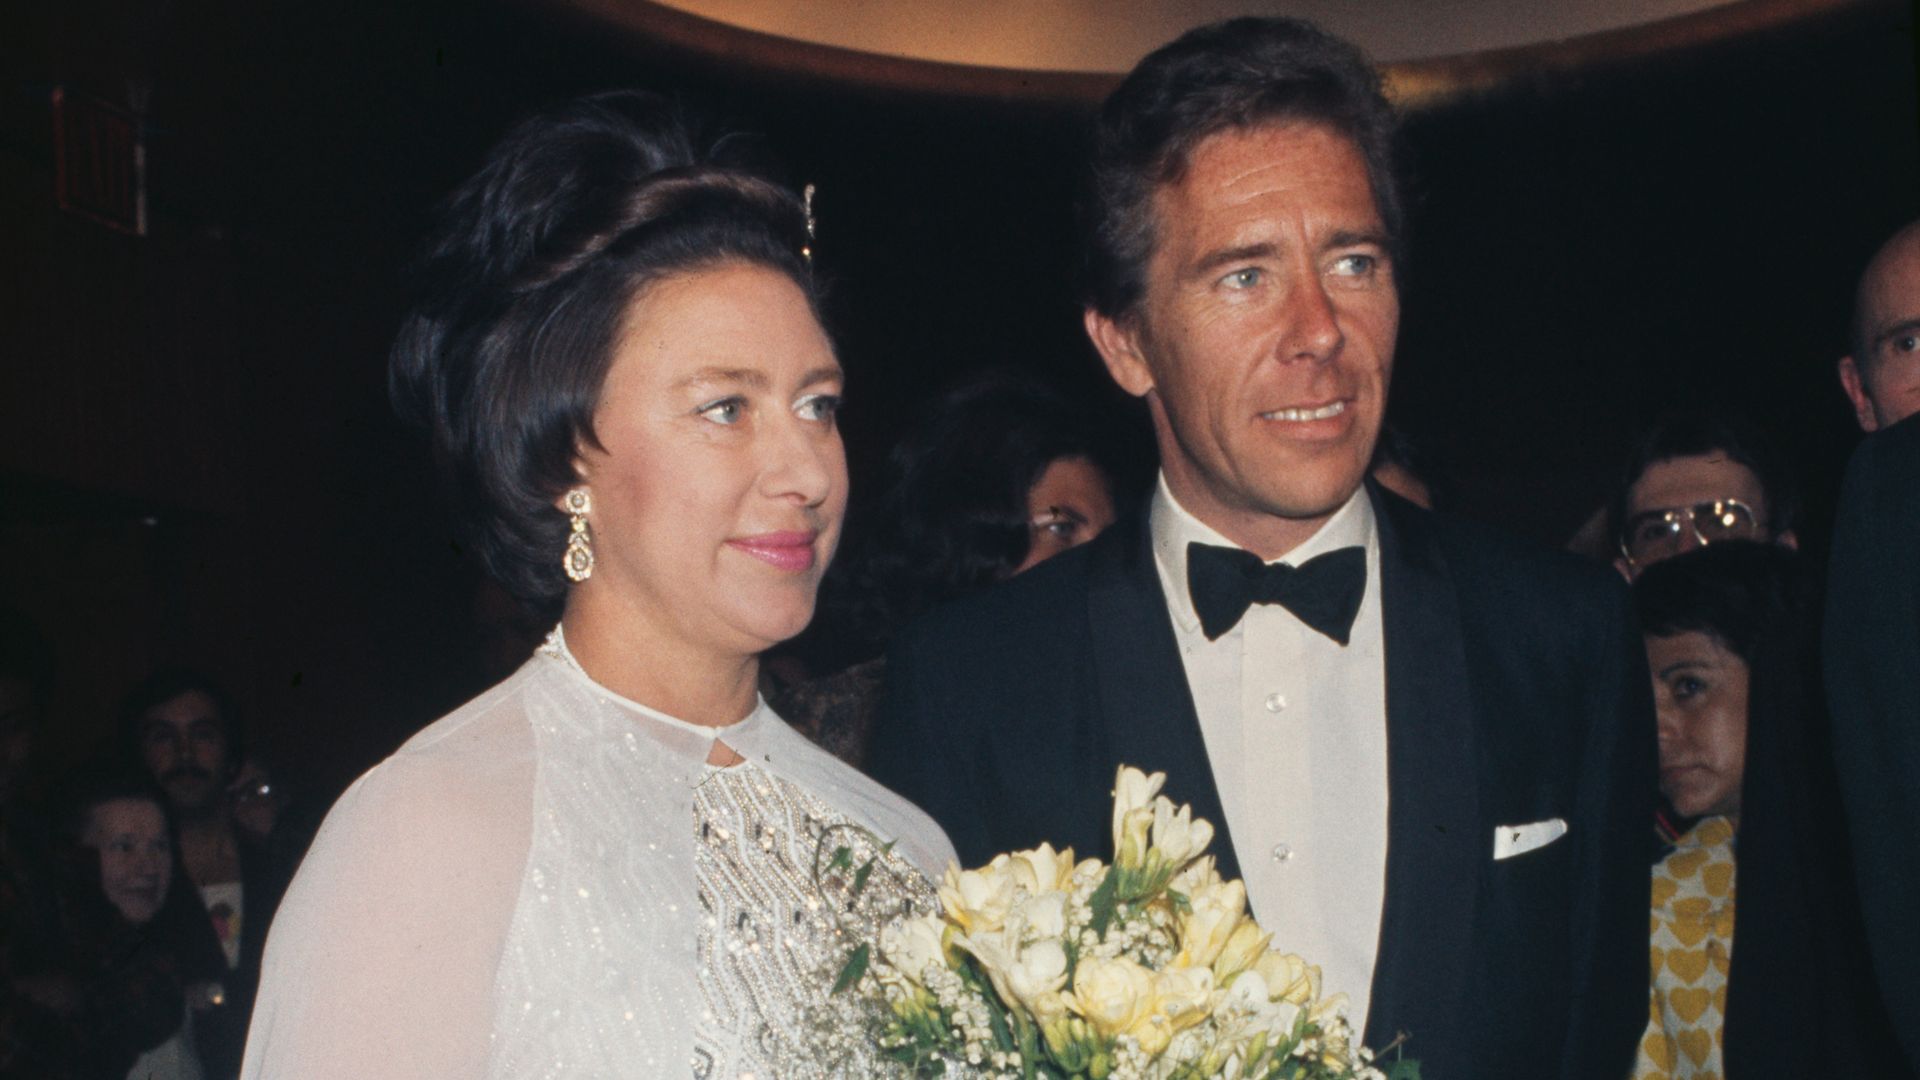 Princess Margaret holding a bouquet of flower standing next to Antony Armstrong-Jones